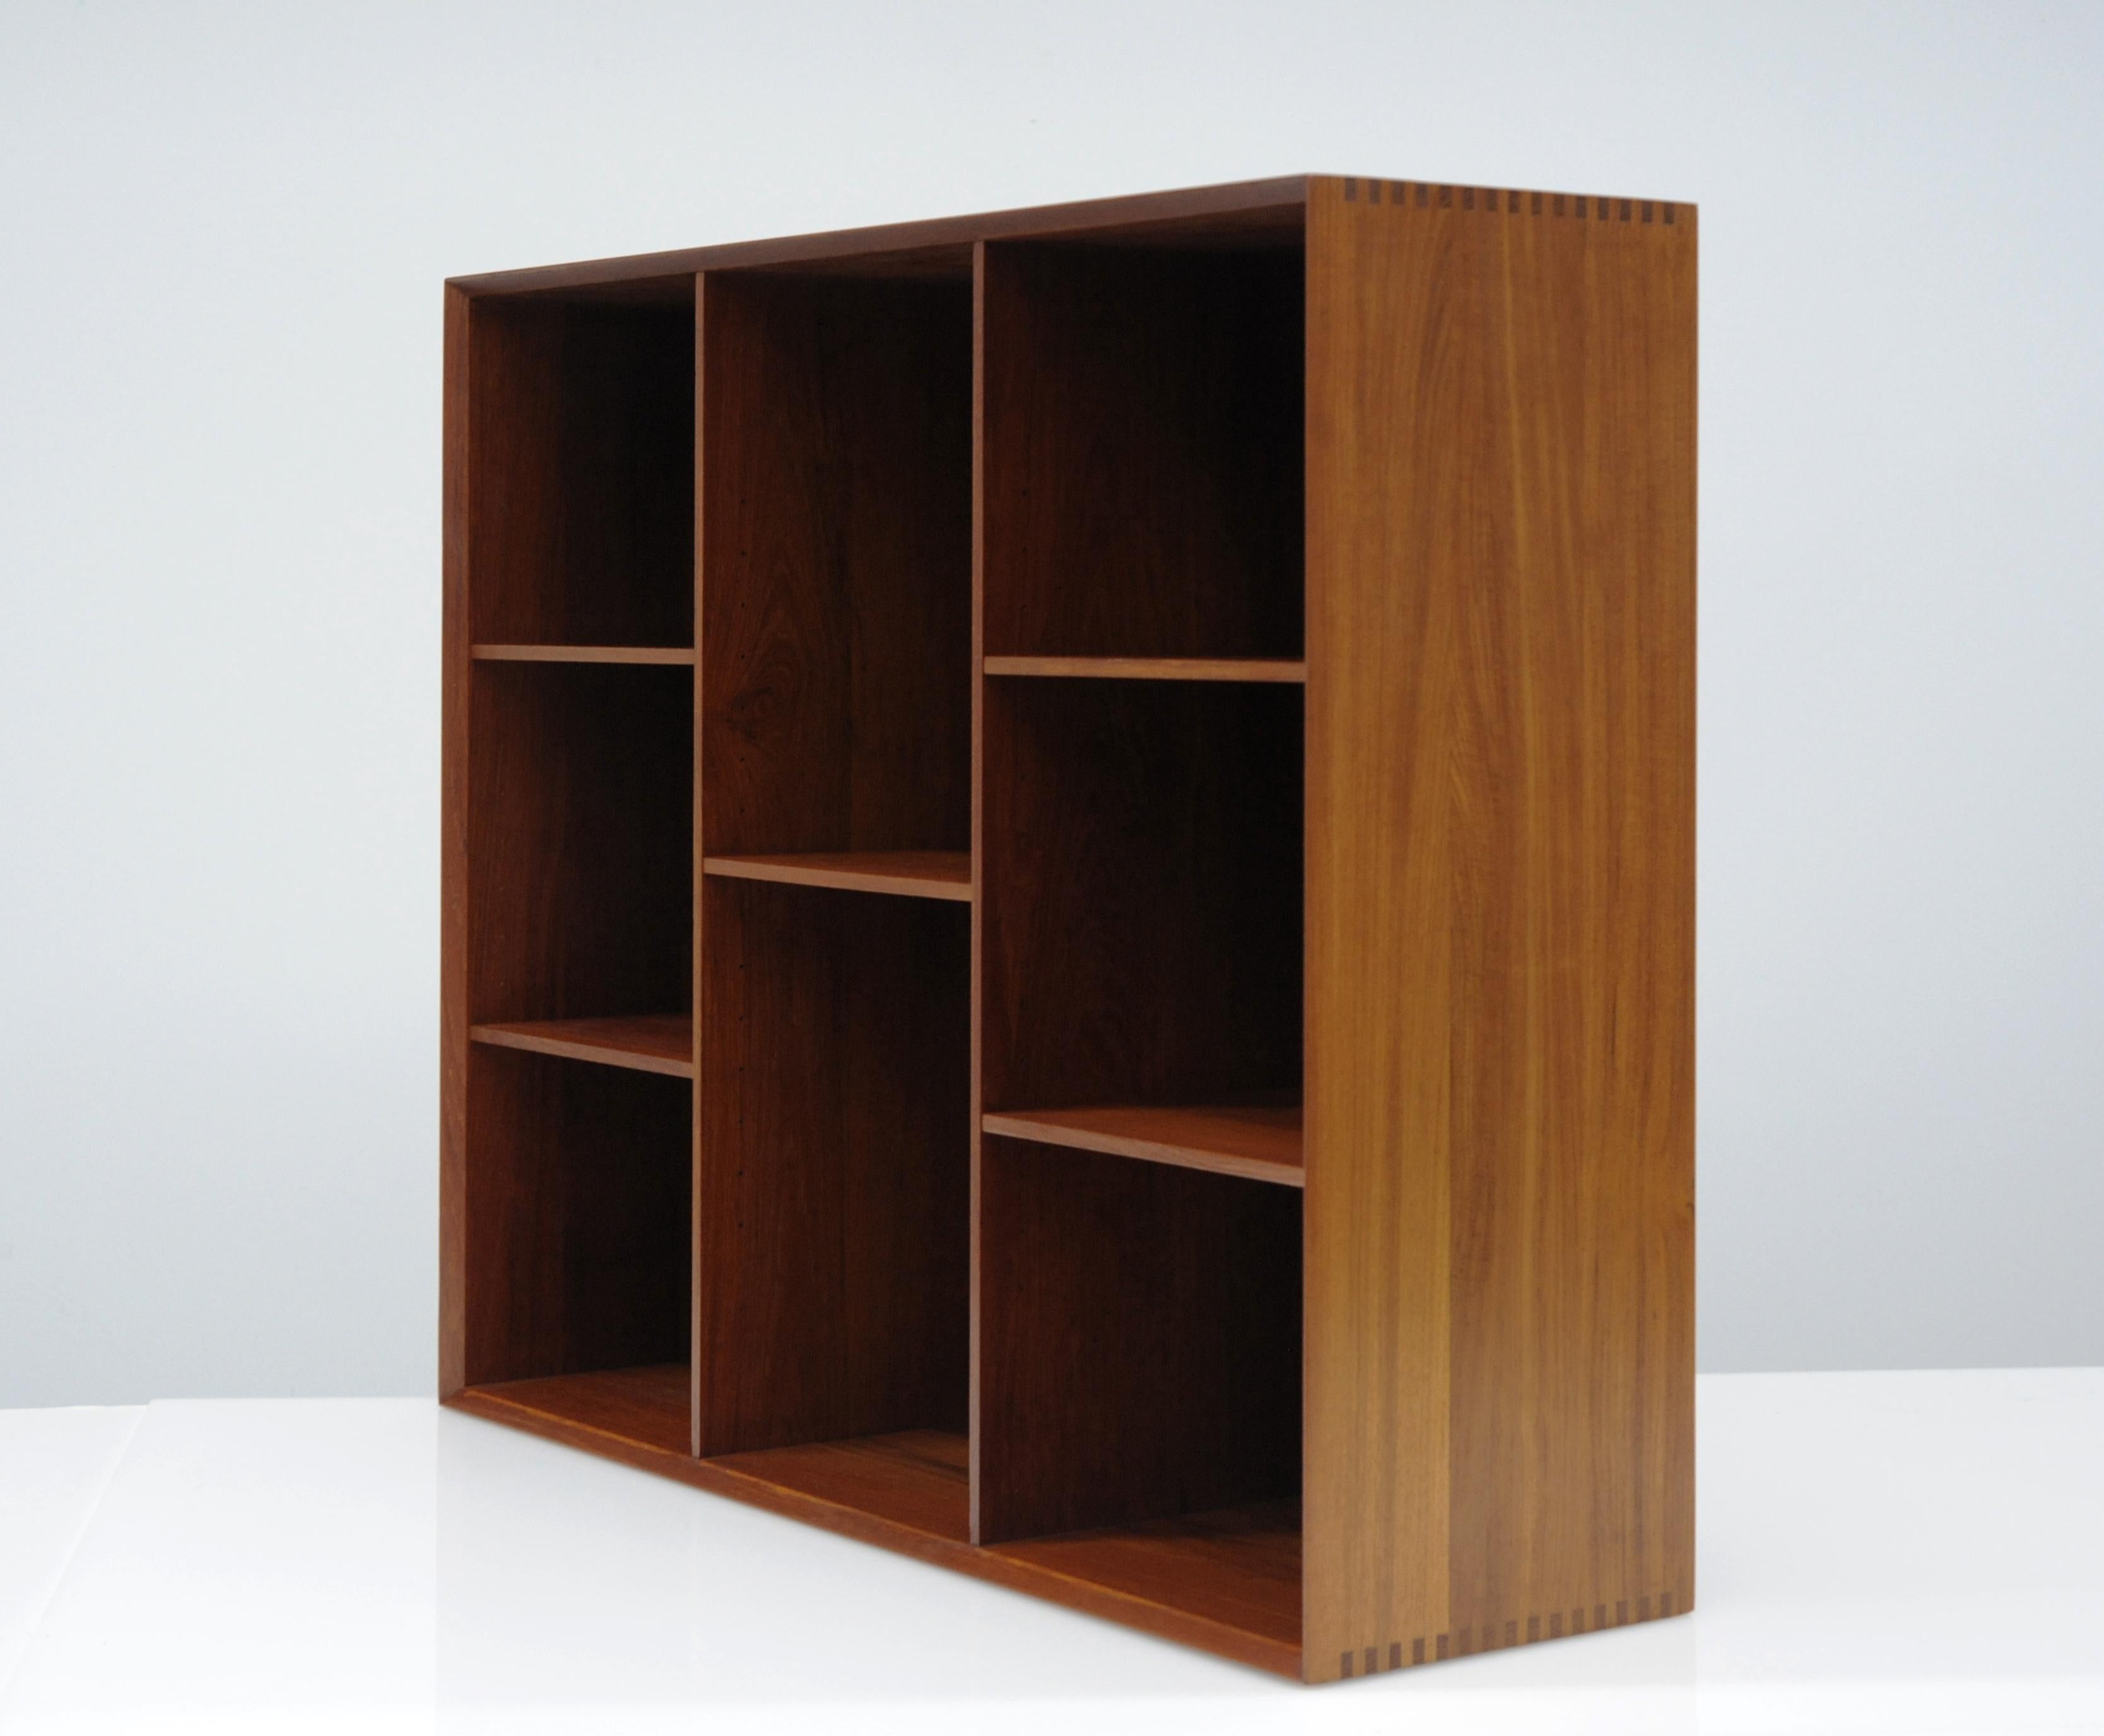 Beautifully constructed bookcase by Peter Hvidt and Orla Mølgaard-Nielsen. Bookcase is clean and in excellent condition. Exposed finger joined details and nice even patina. Bookcase was originally acquired Denmark in 1962. Case is designed to sit on